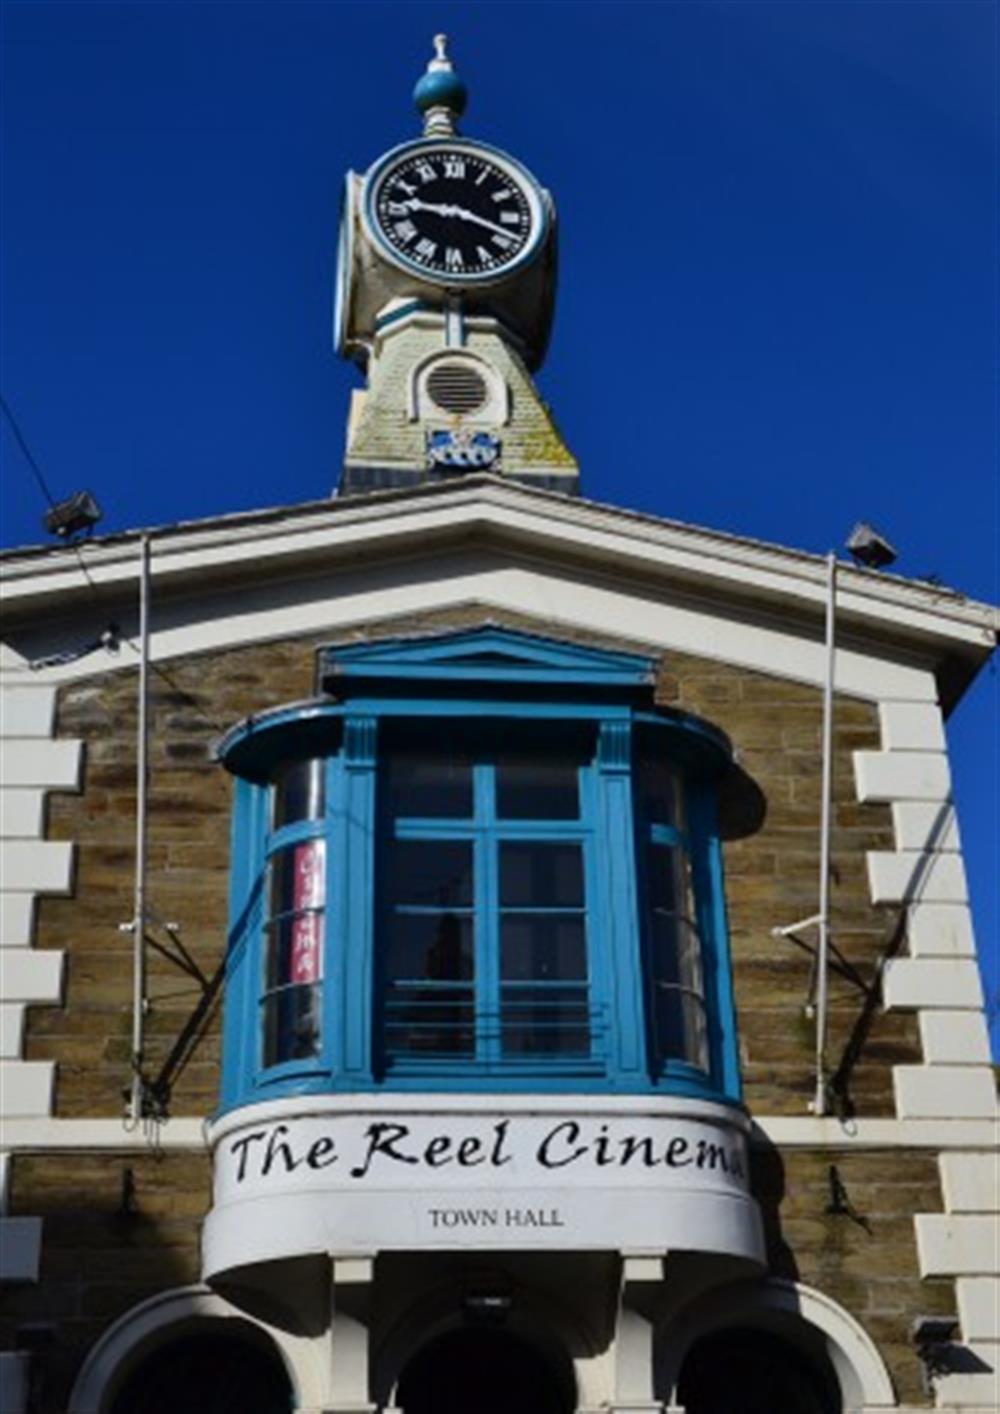 The Reel Cinema - perfect for those rainy days!